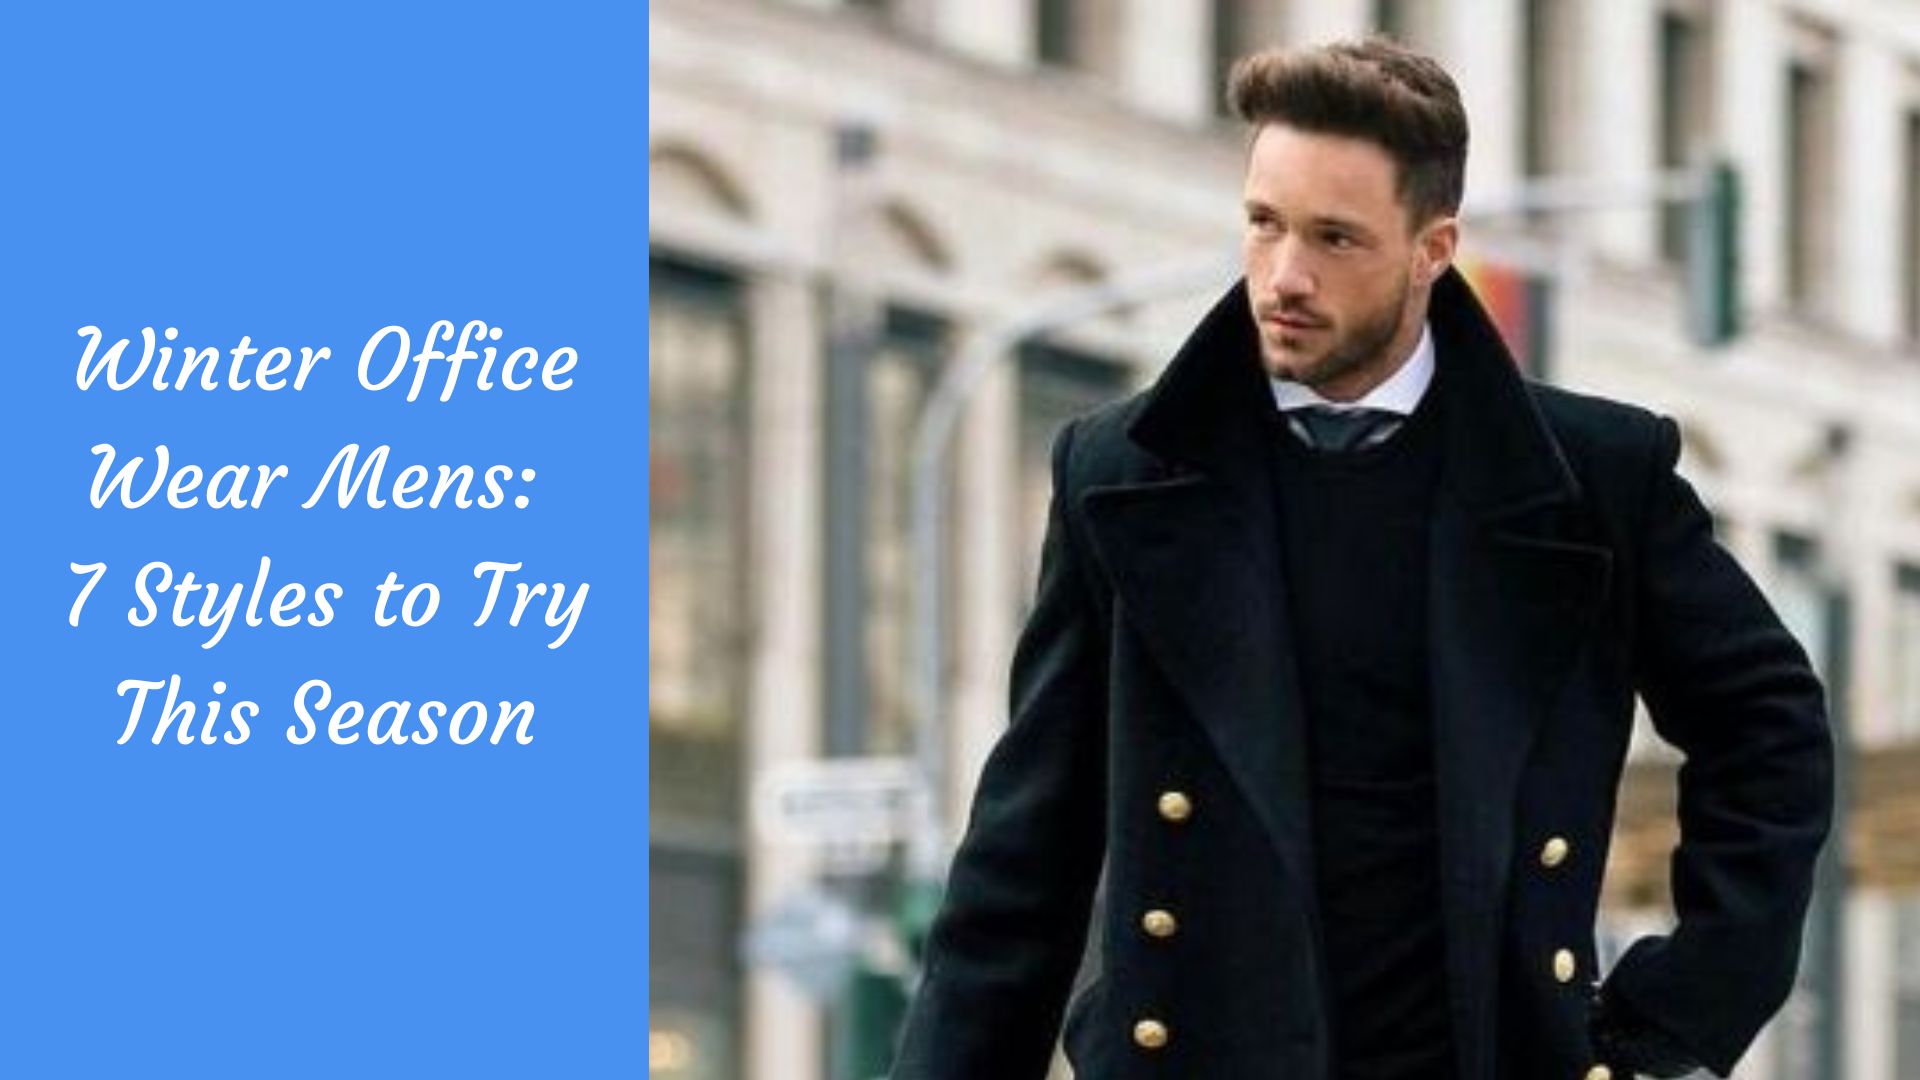 Winter Office Wear Mens: 7 Styles to Try This Season - The Kosha Journal